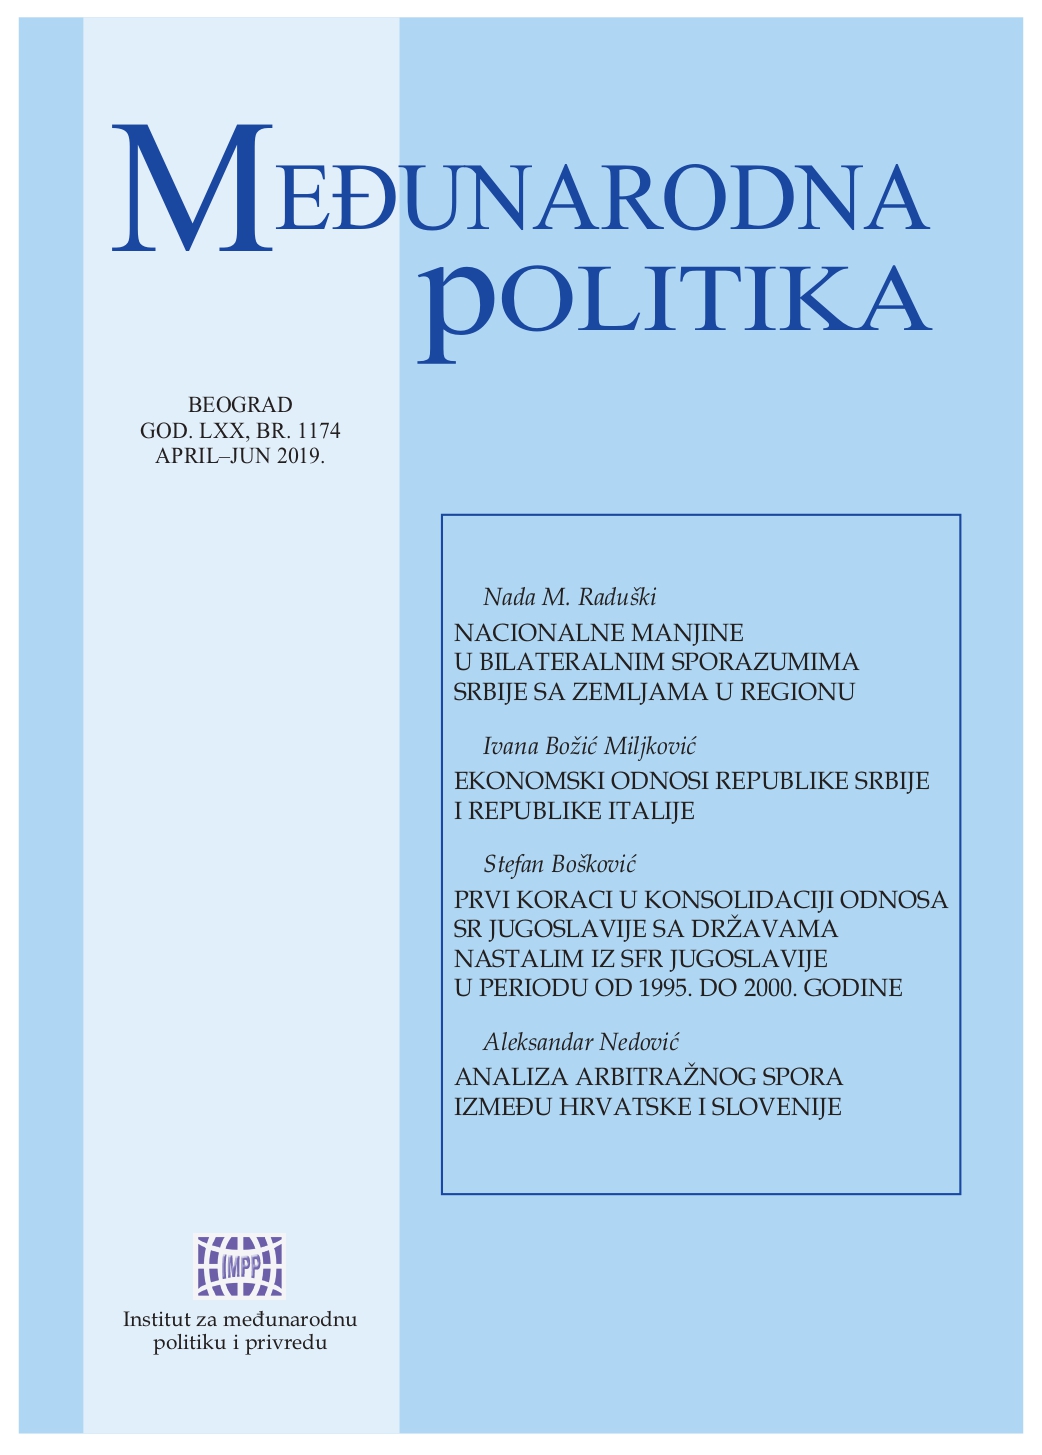 First steps in consolidation of the relations between the Federal Republic of Yugoslavia and new states emerged from Socialist Federative Republic of Yugoslavia between 1995 and 2000